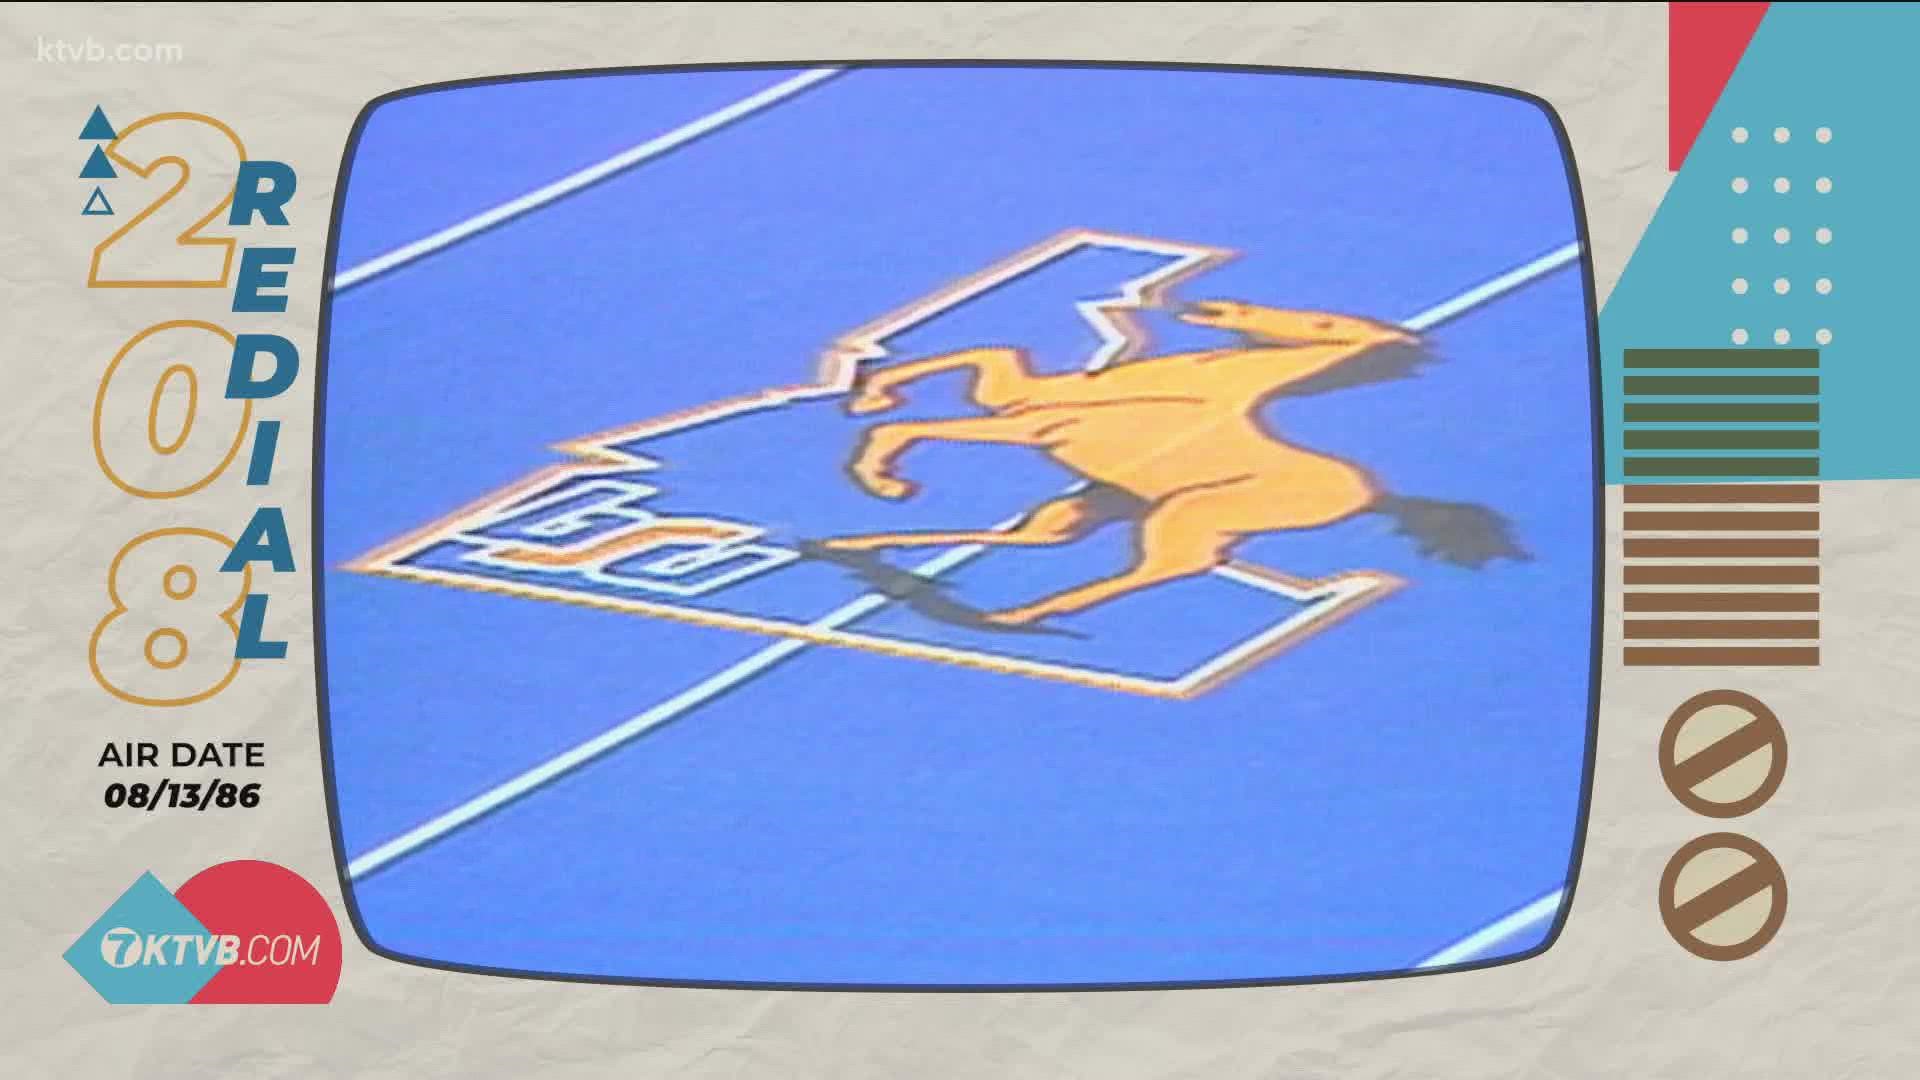 On Sept. 13, 1986, the first-ever game was played on the blue astroturf at Boise State's football stadium.